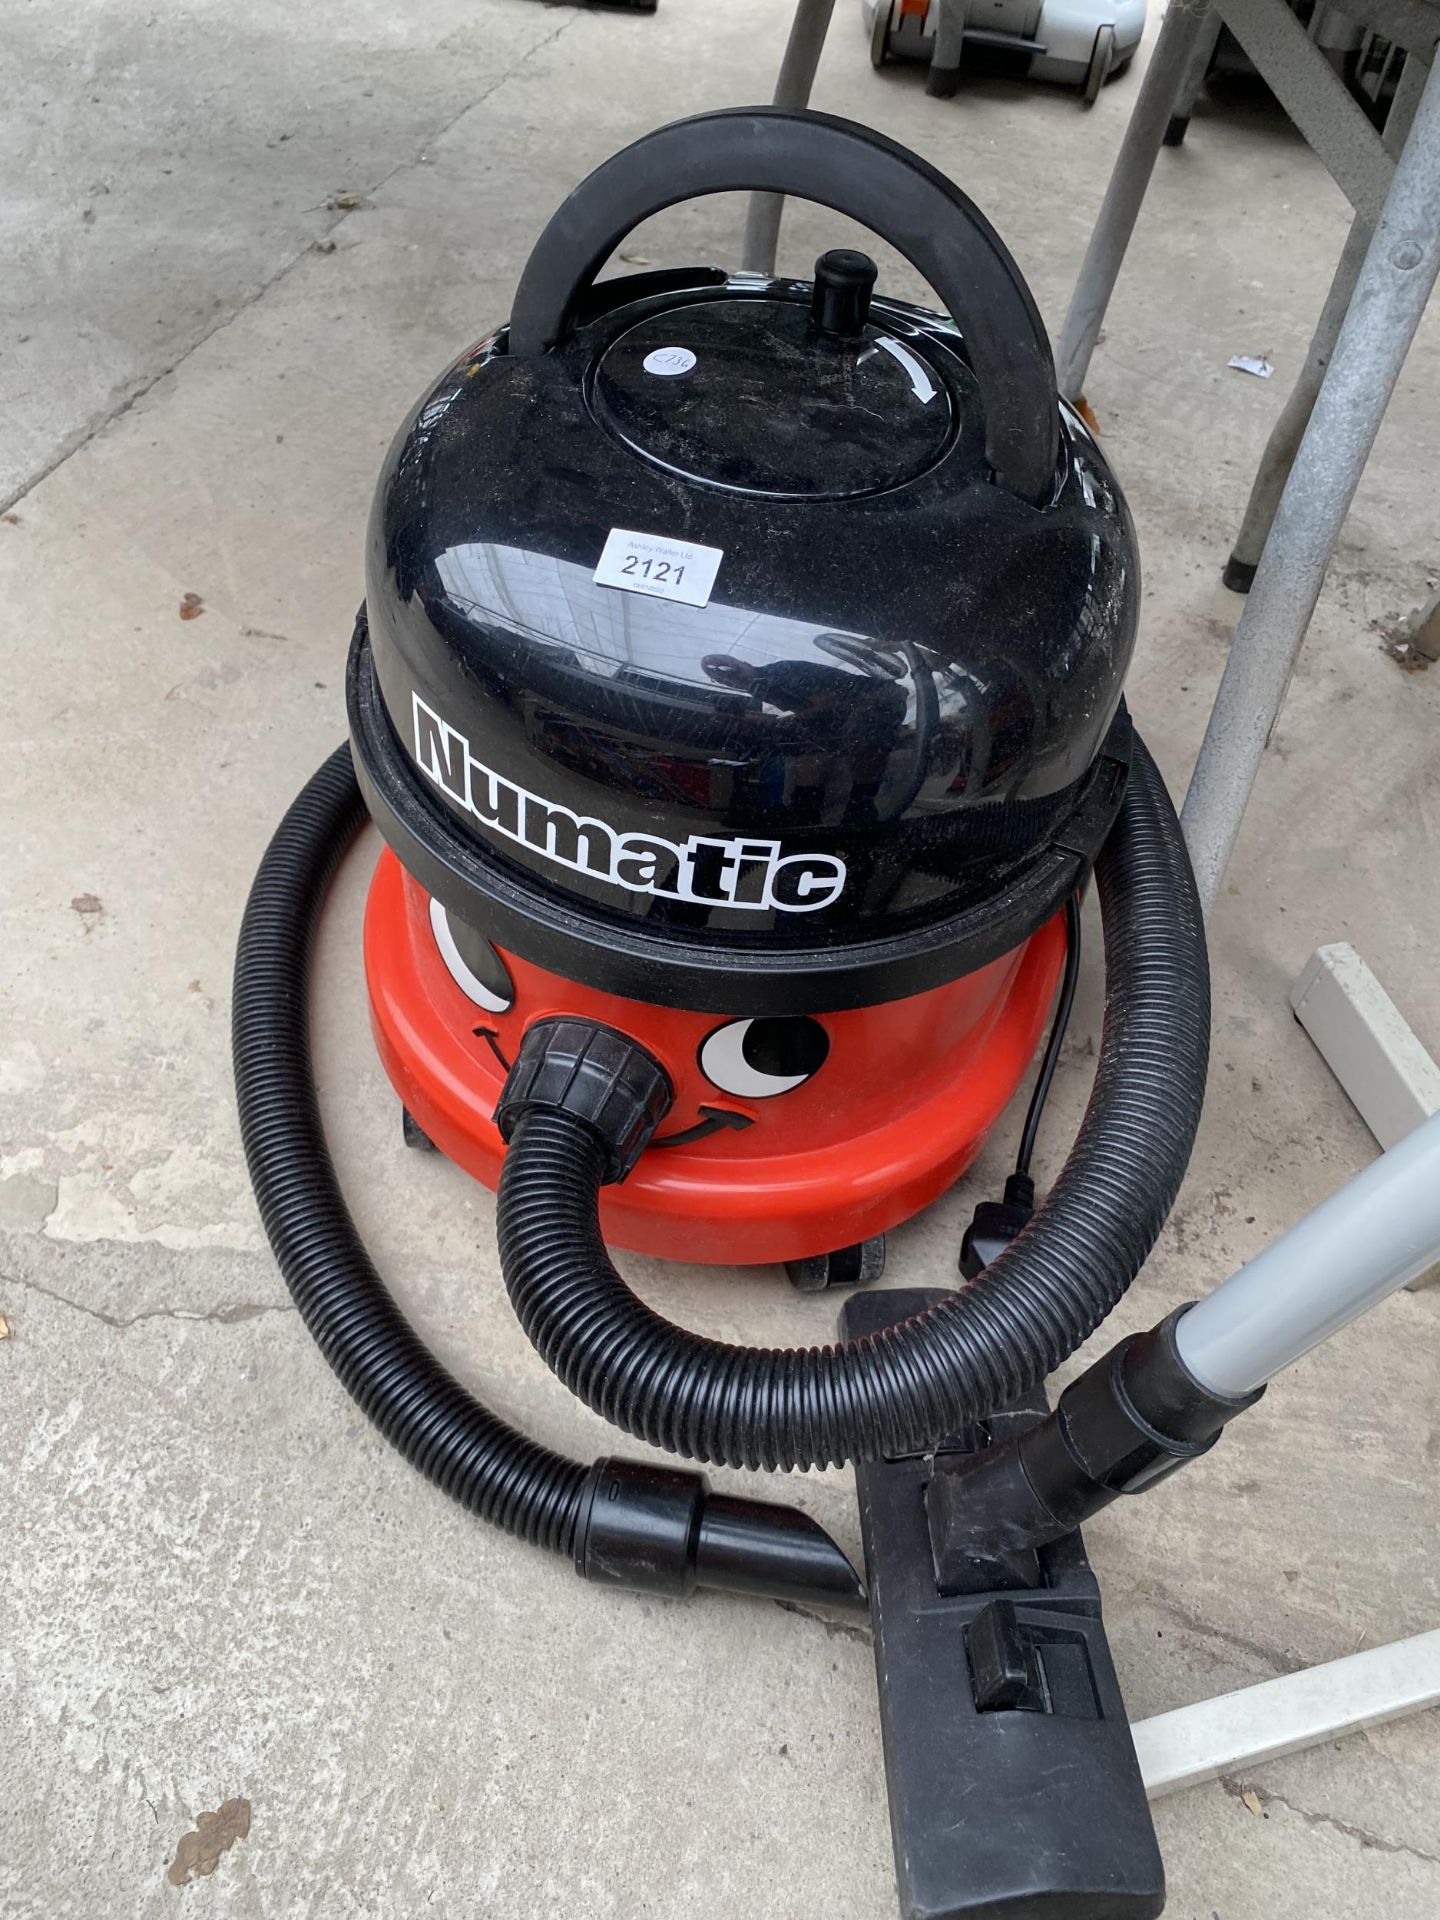 A NUMATIC HENRY HOOVER